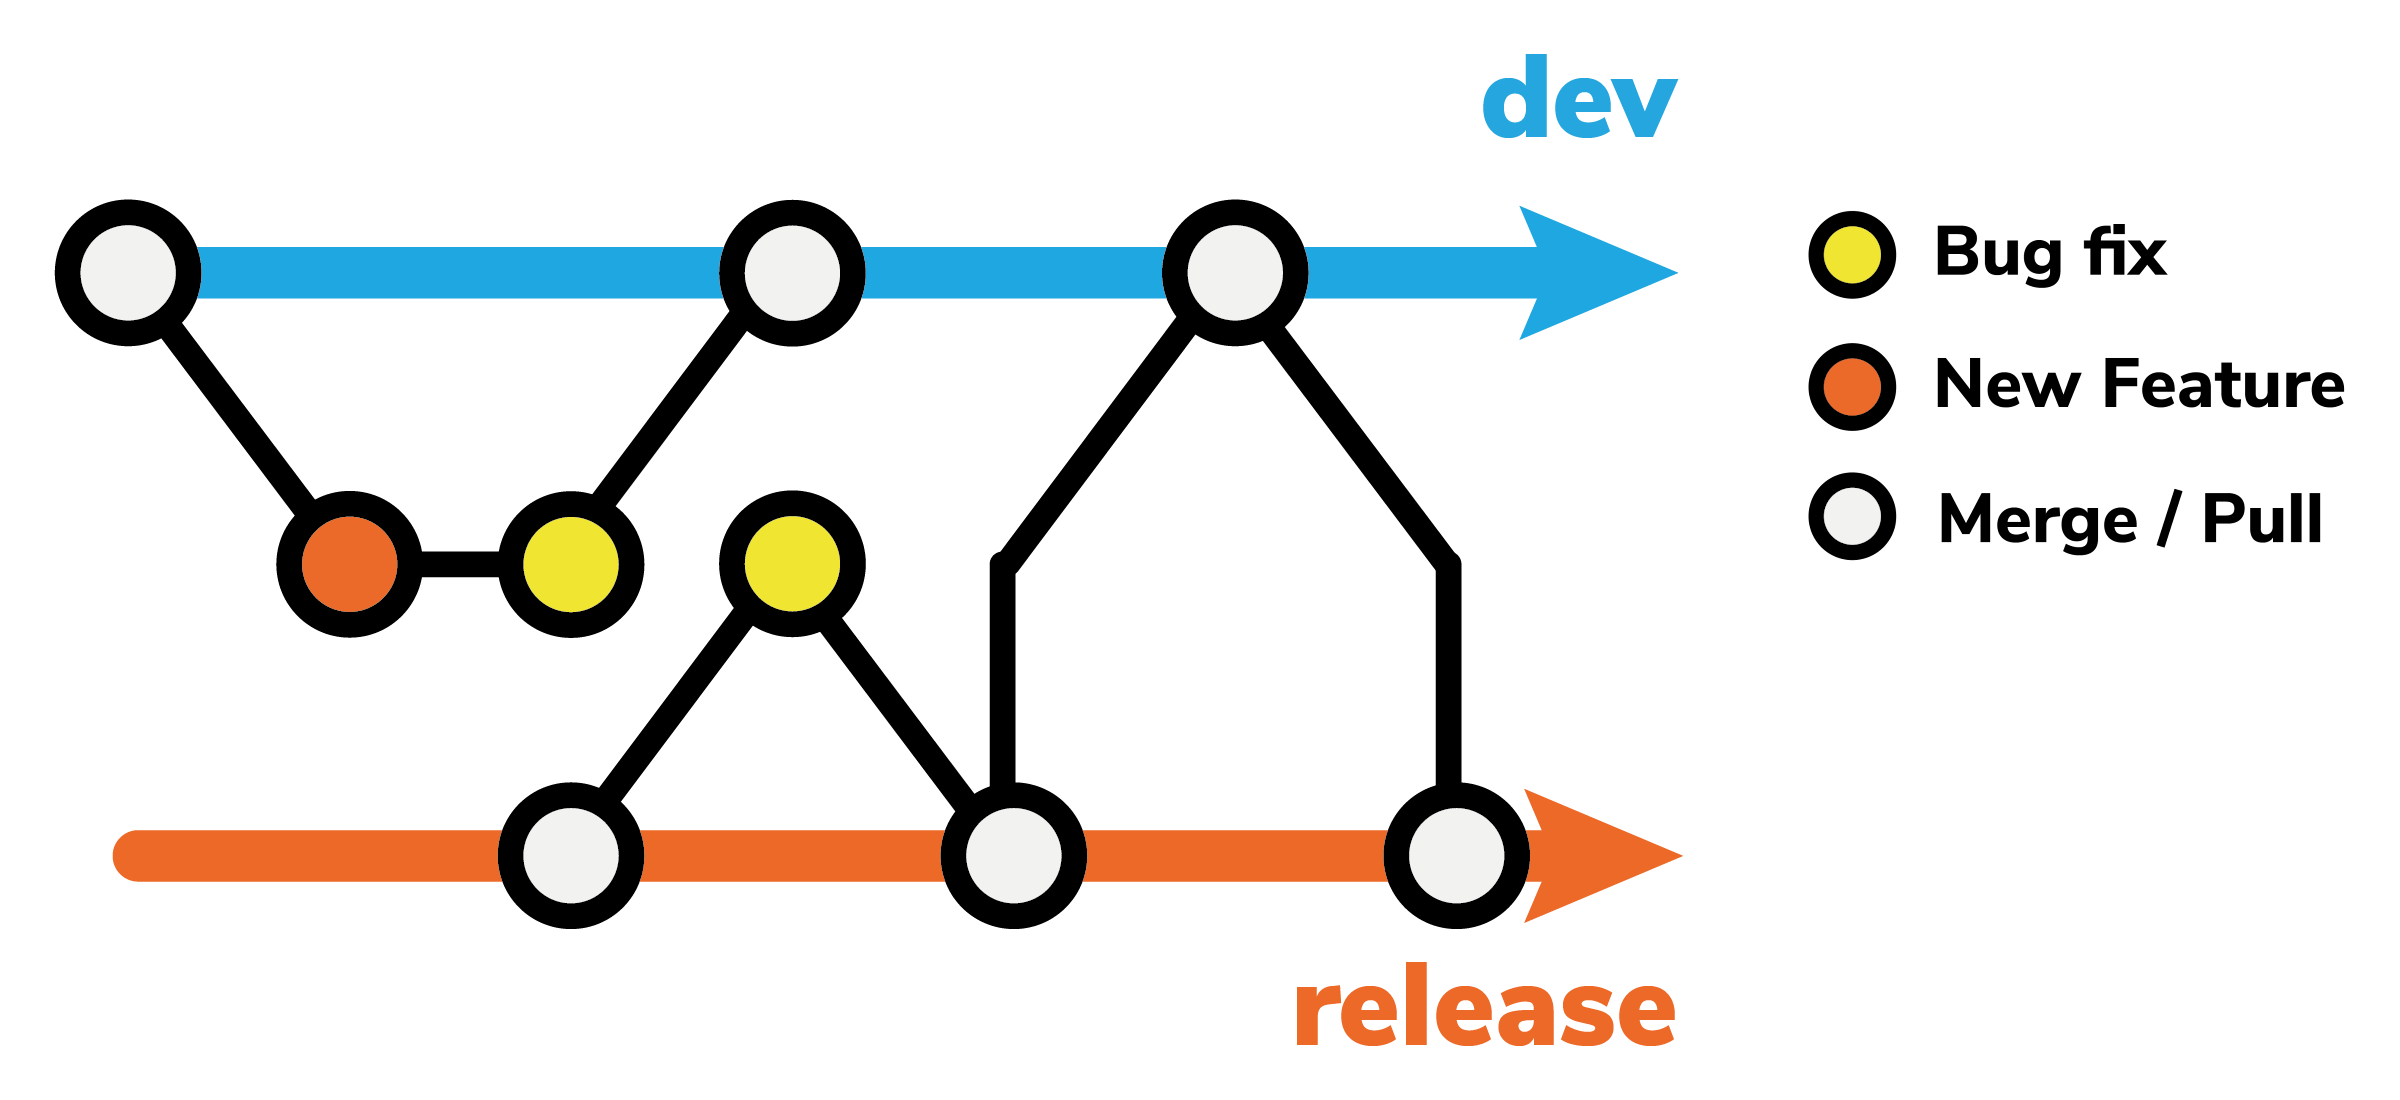 Git Flow used by the PsychoPy project, with 2 main trunks for 'dev' and 'release'